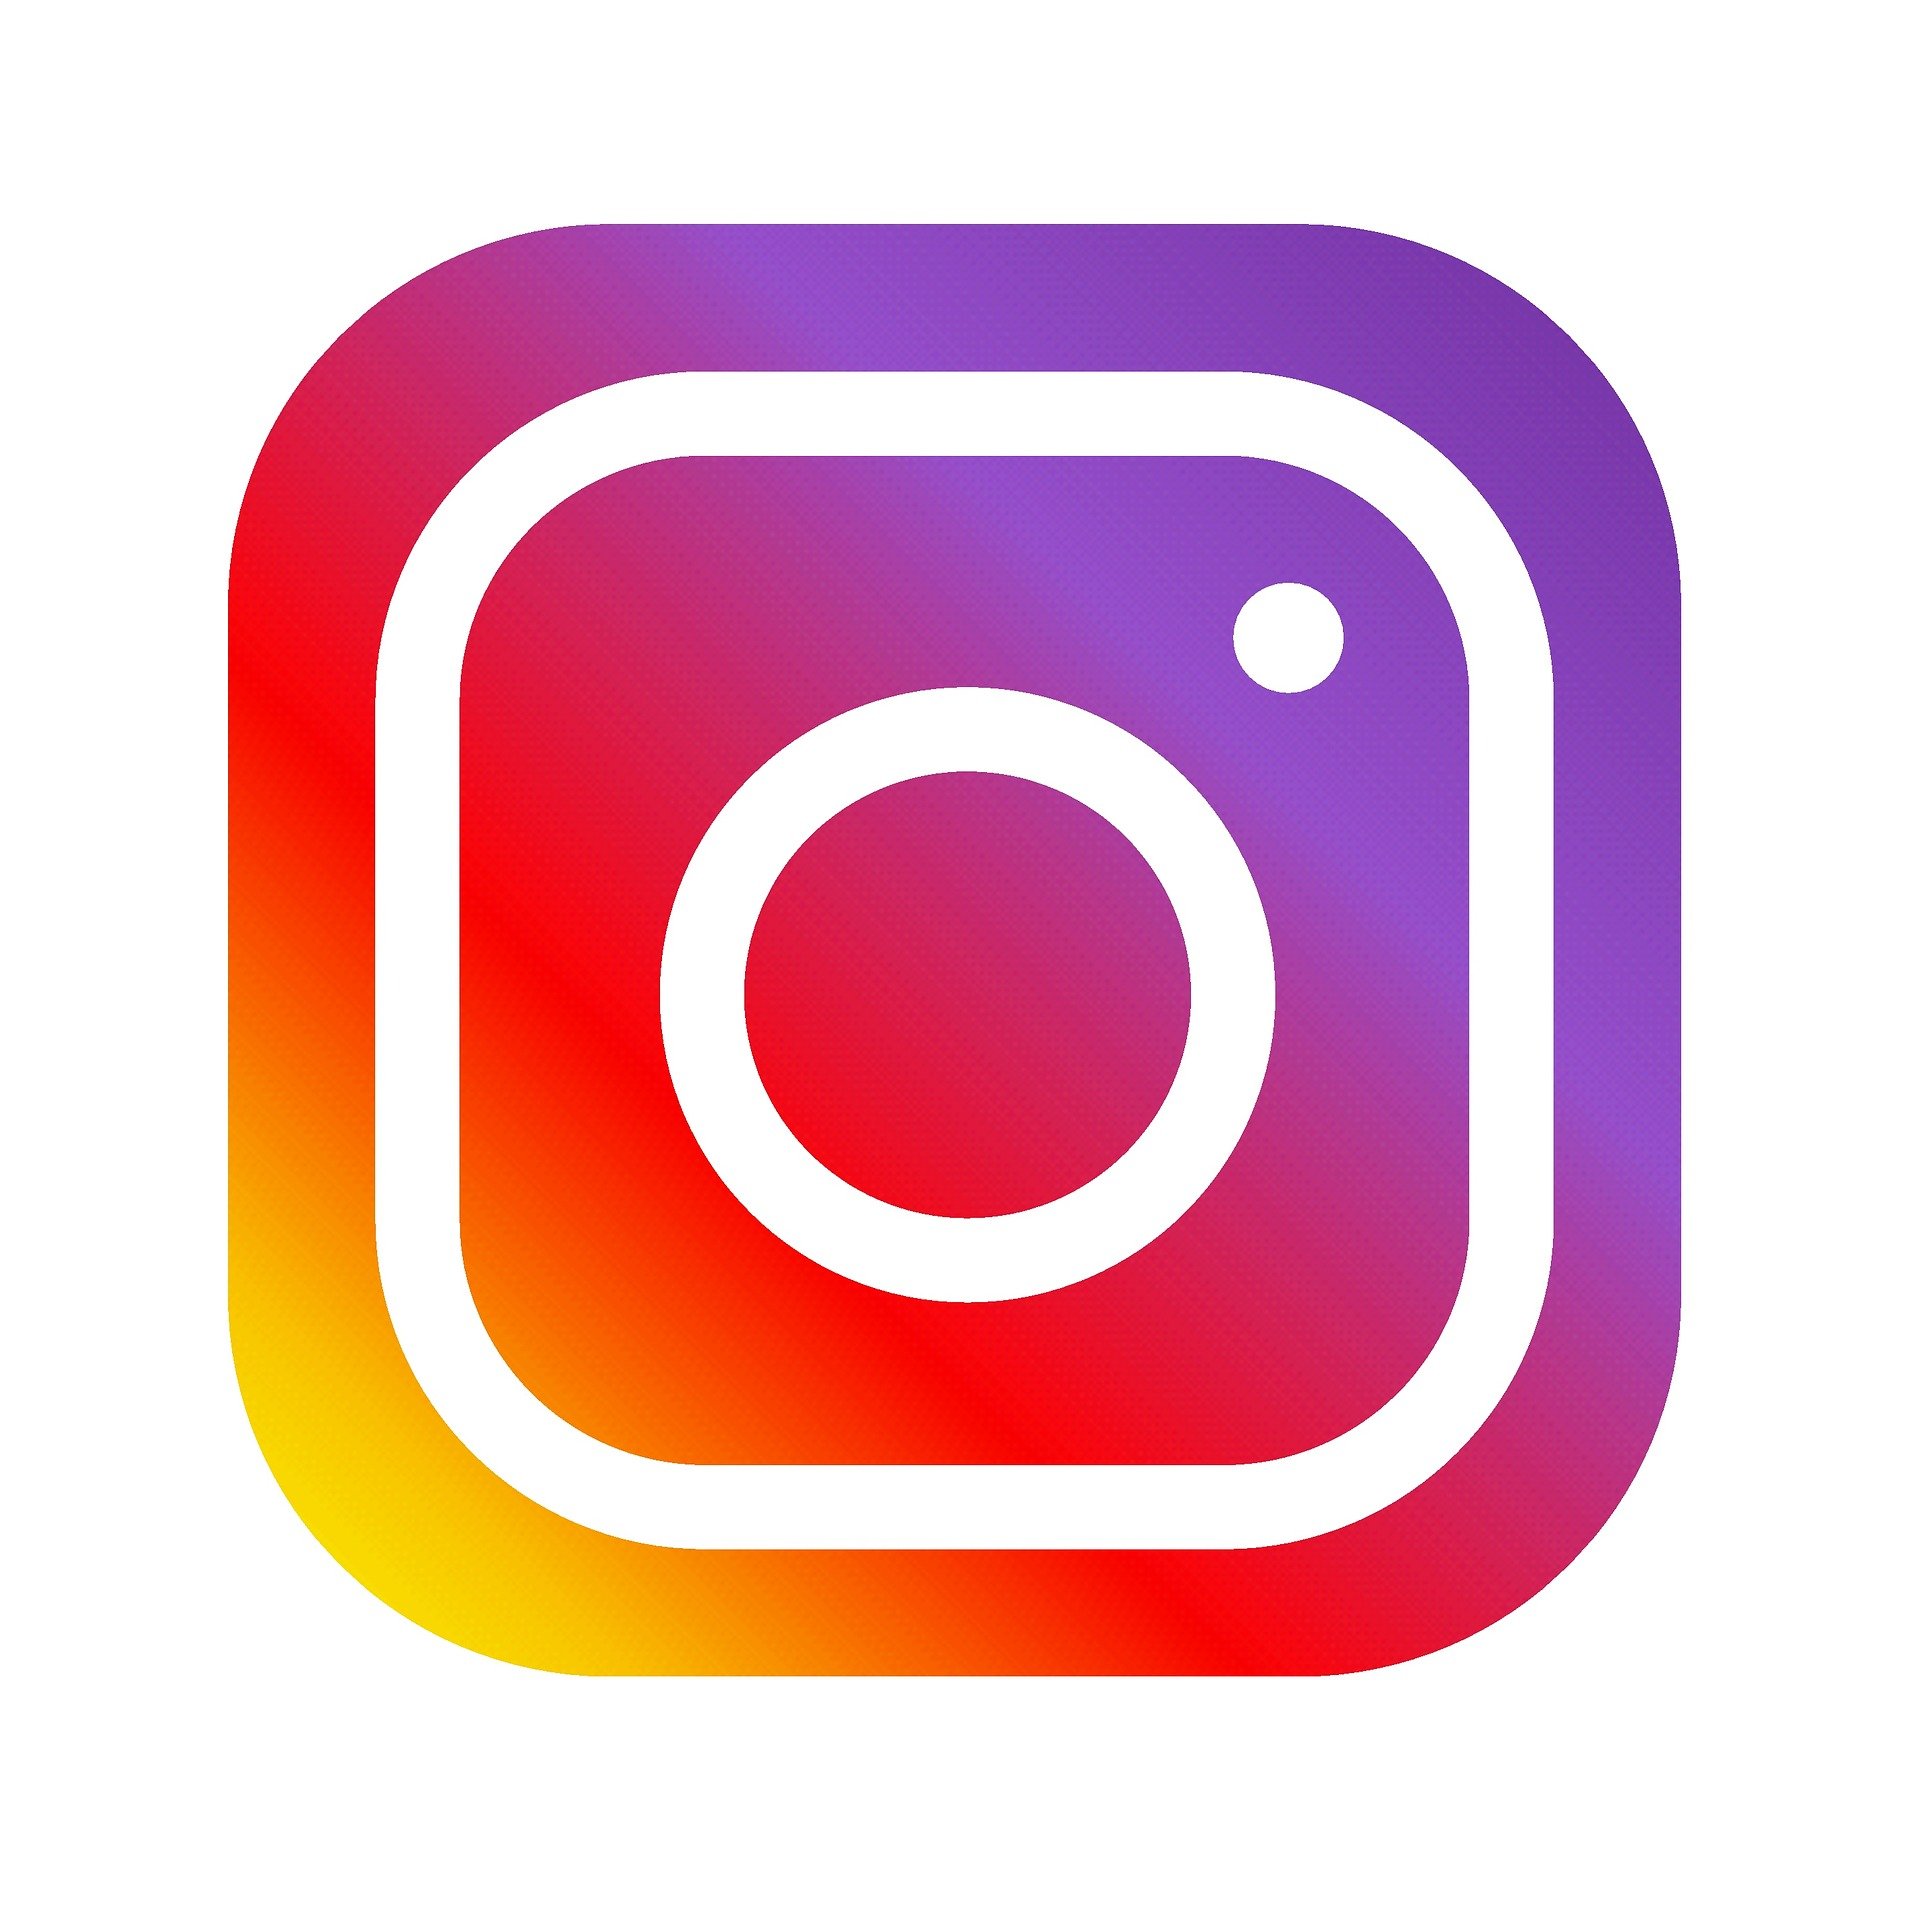 How to Promote your Business on Instagram